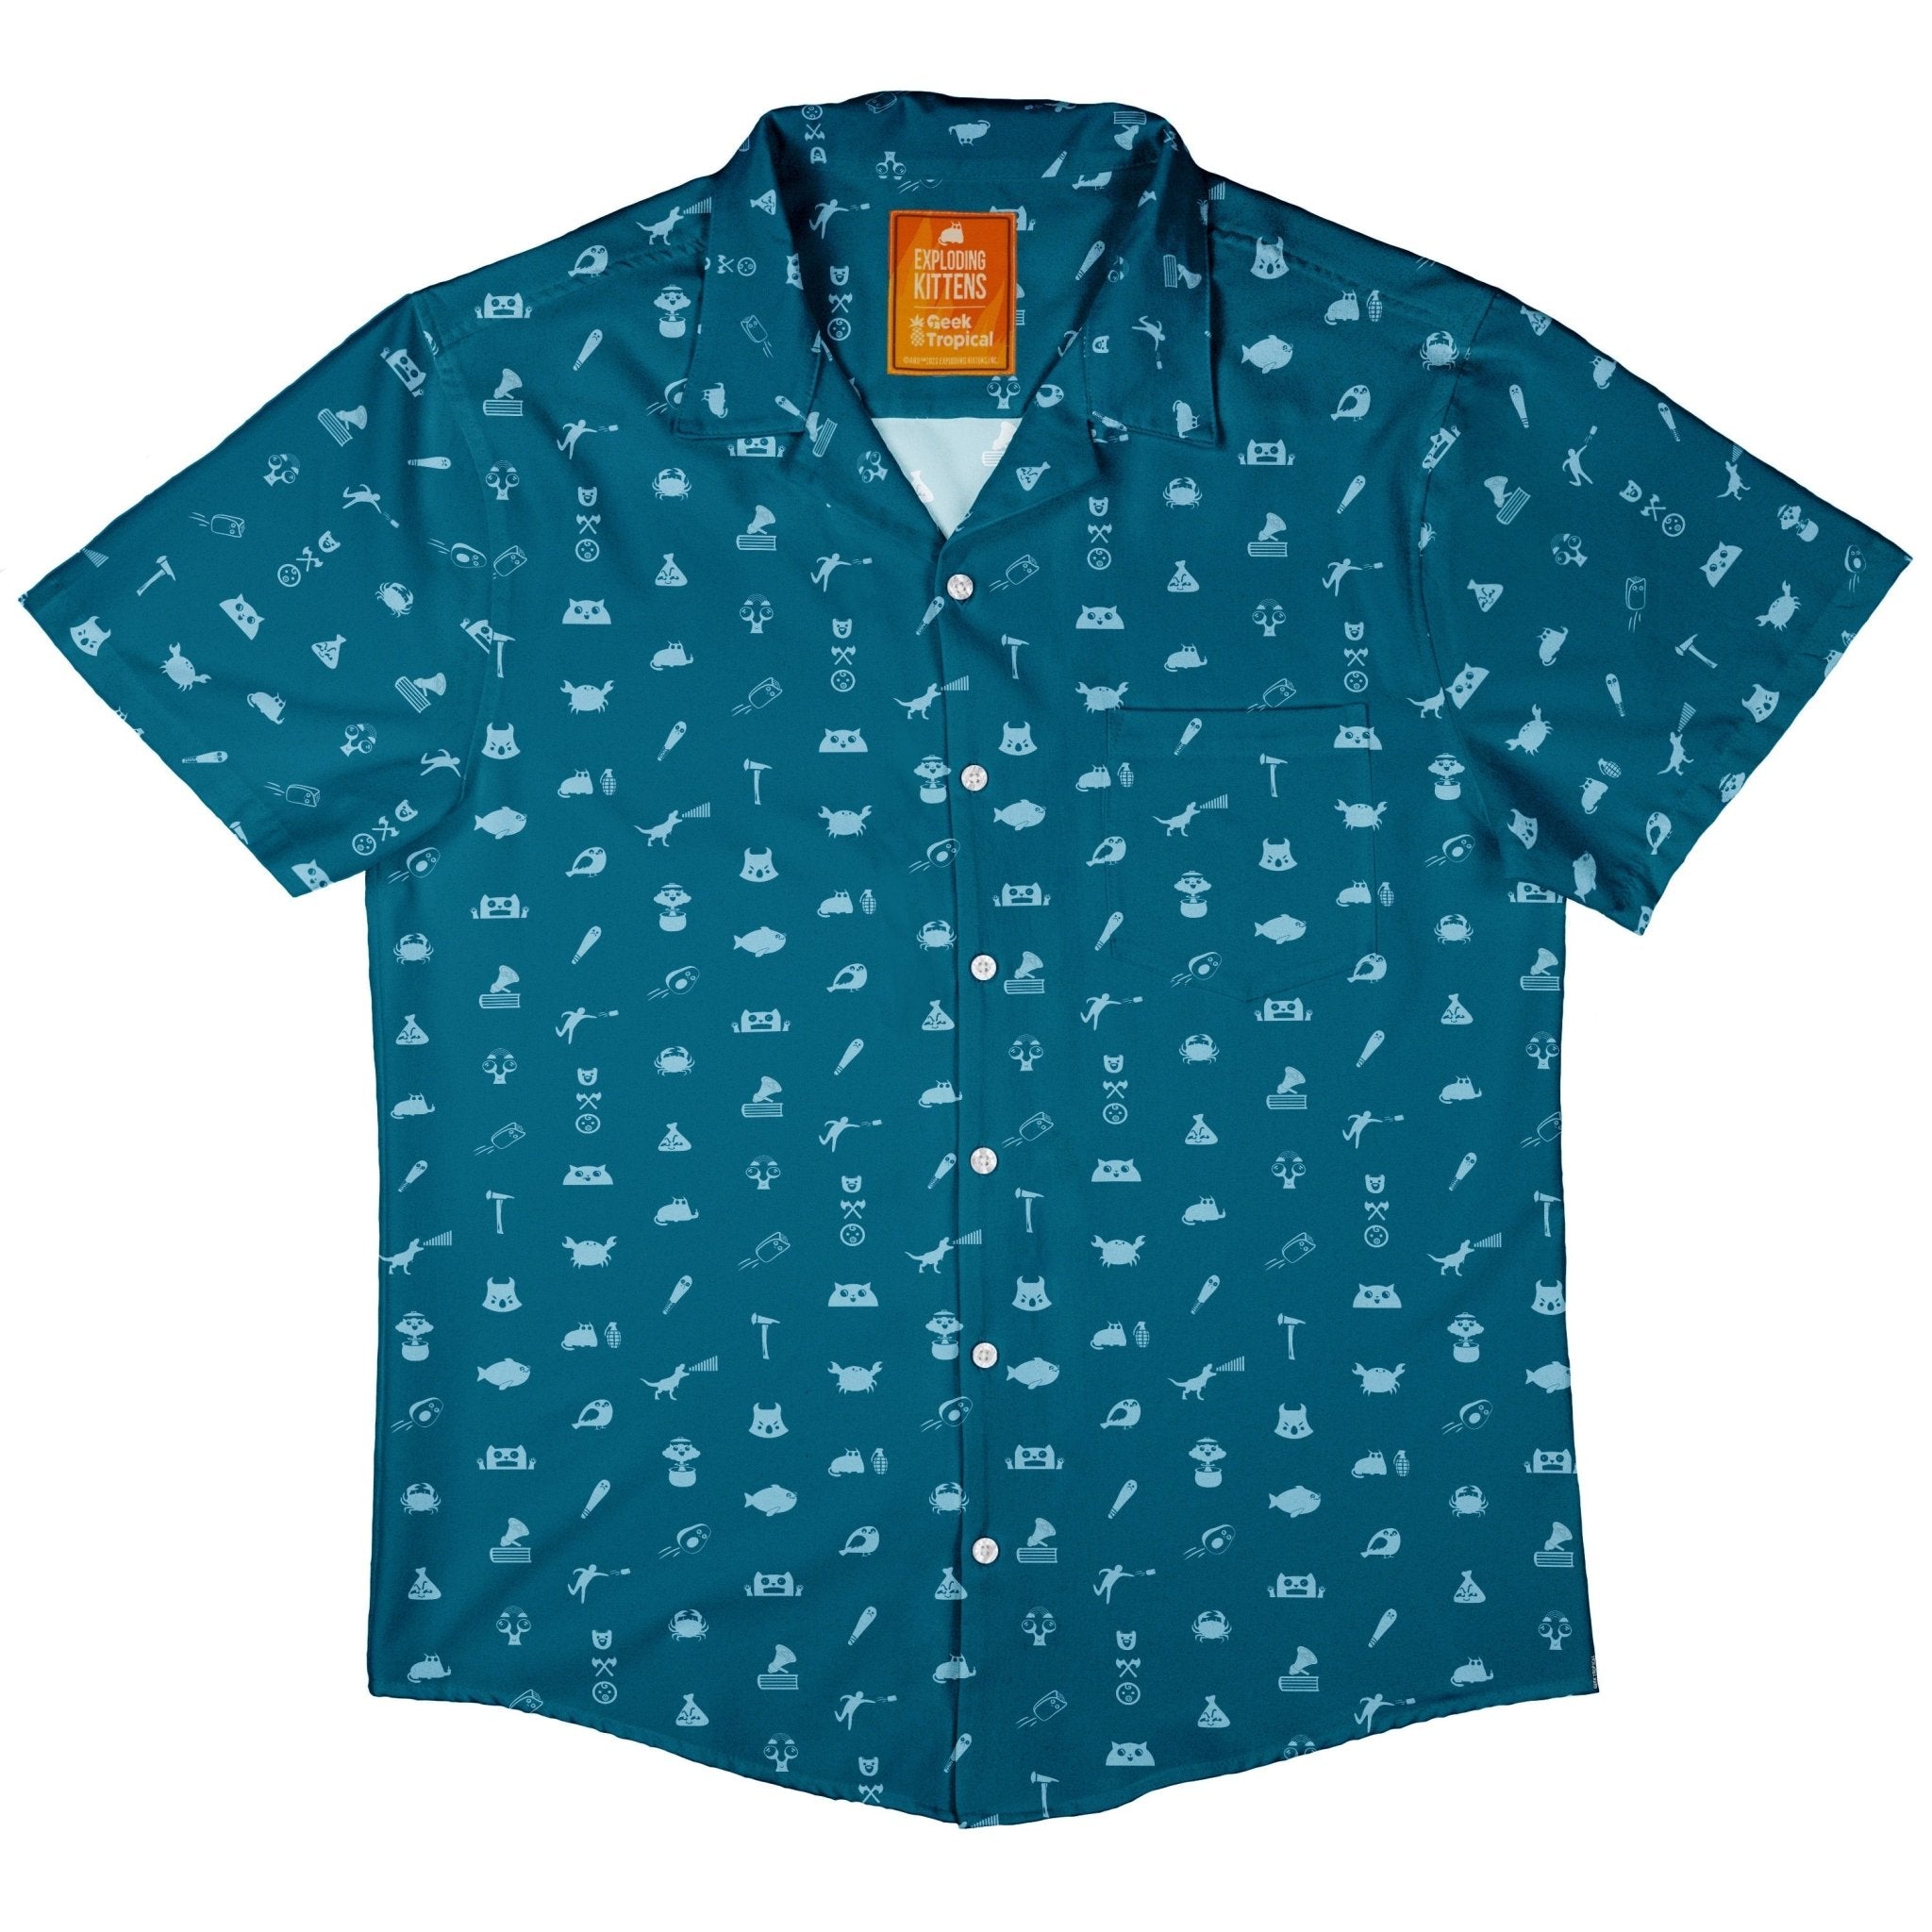 Iconic Exploding Kittens Button Up Shirt - adult sizing - Animal Patterns - board game print